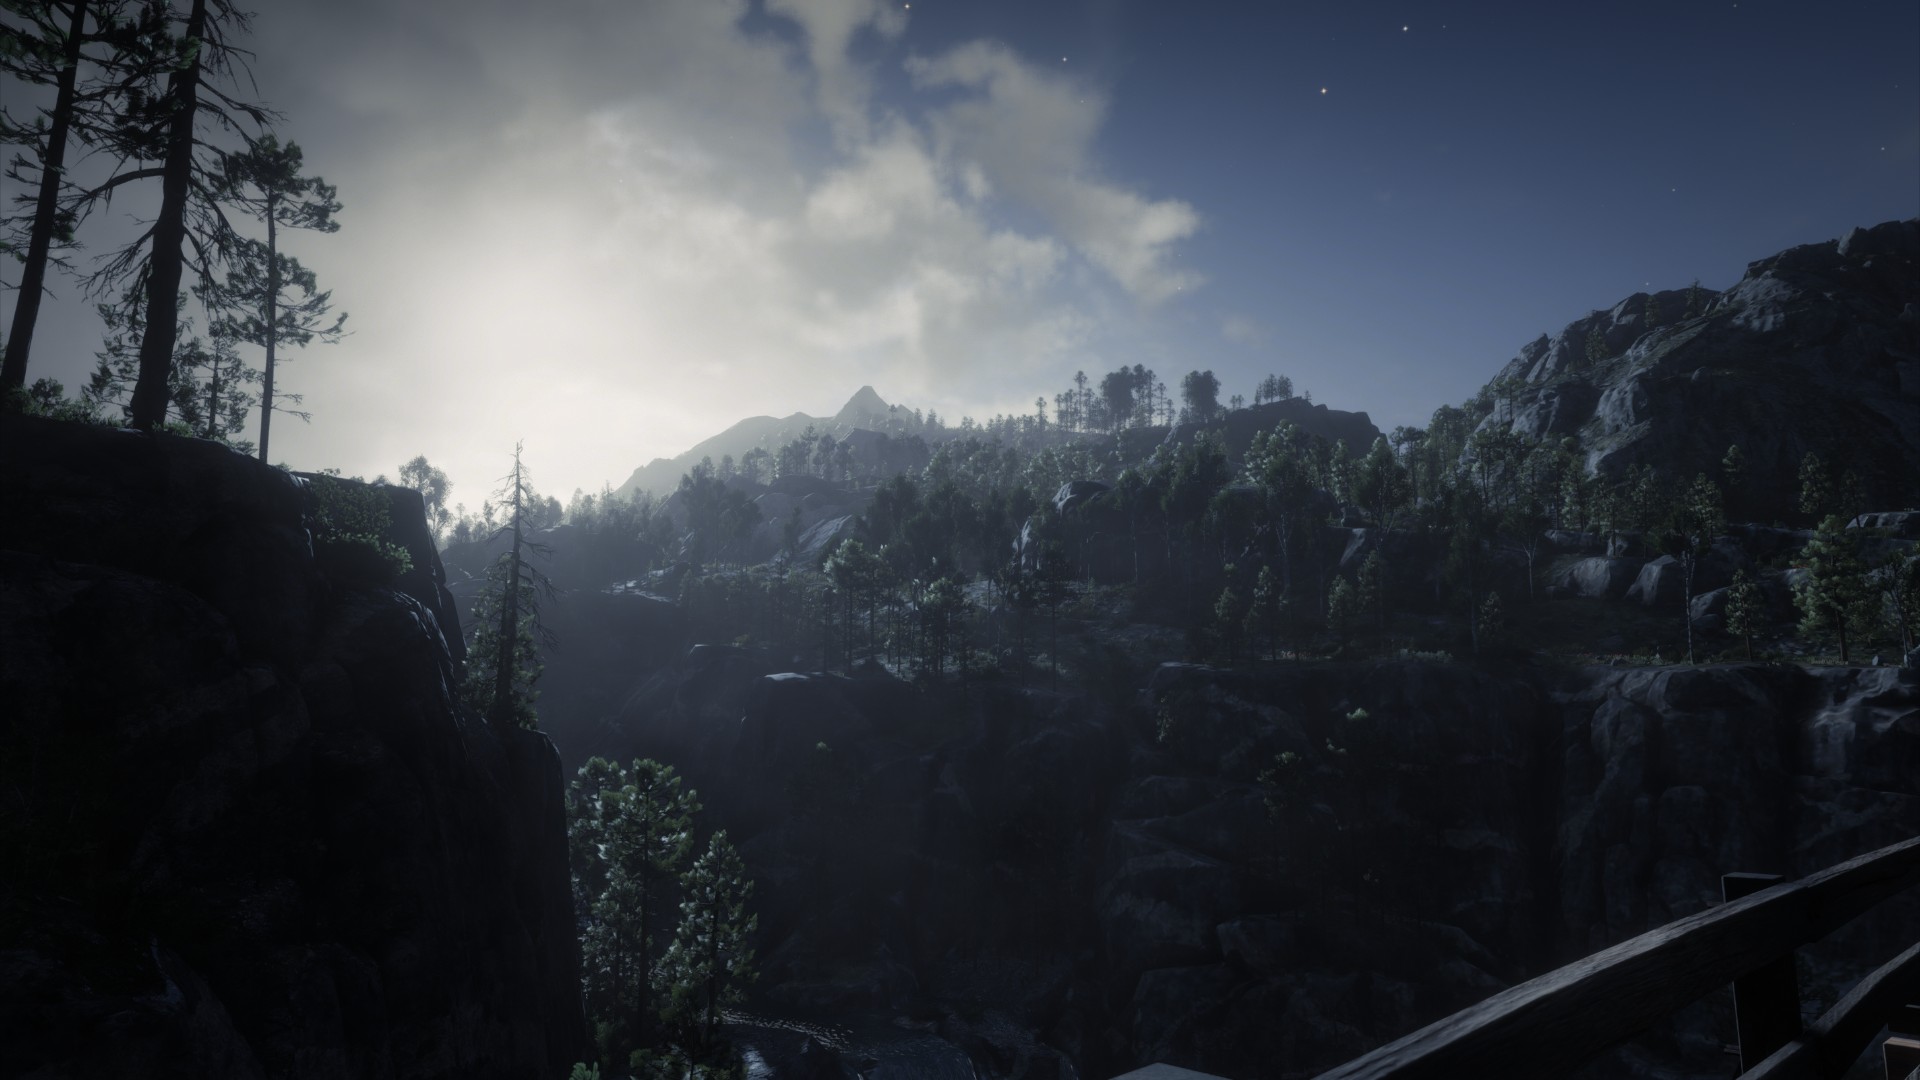 Red dead redemption 2 природа. Red Dead Redemption 2 1920x1080. Red Dead Redemption 2 Tree. Red Dead Redemption 2 Wallpapers 1920x1080. Red Dead Redemption 2 nature.